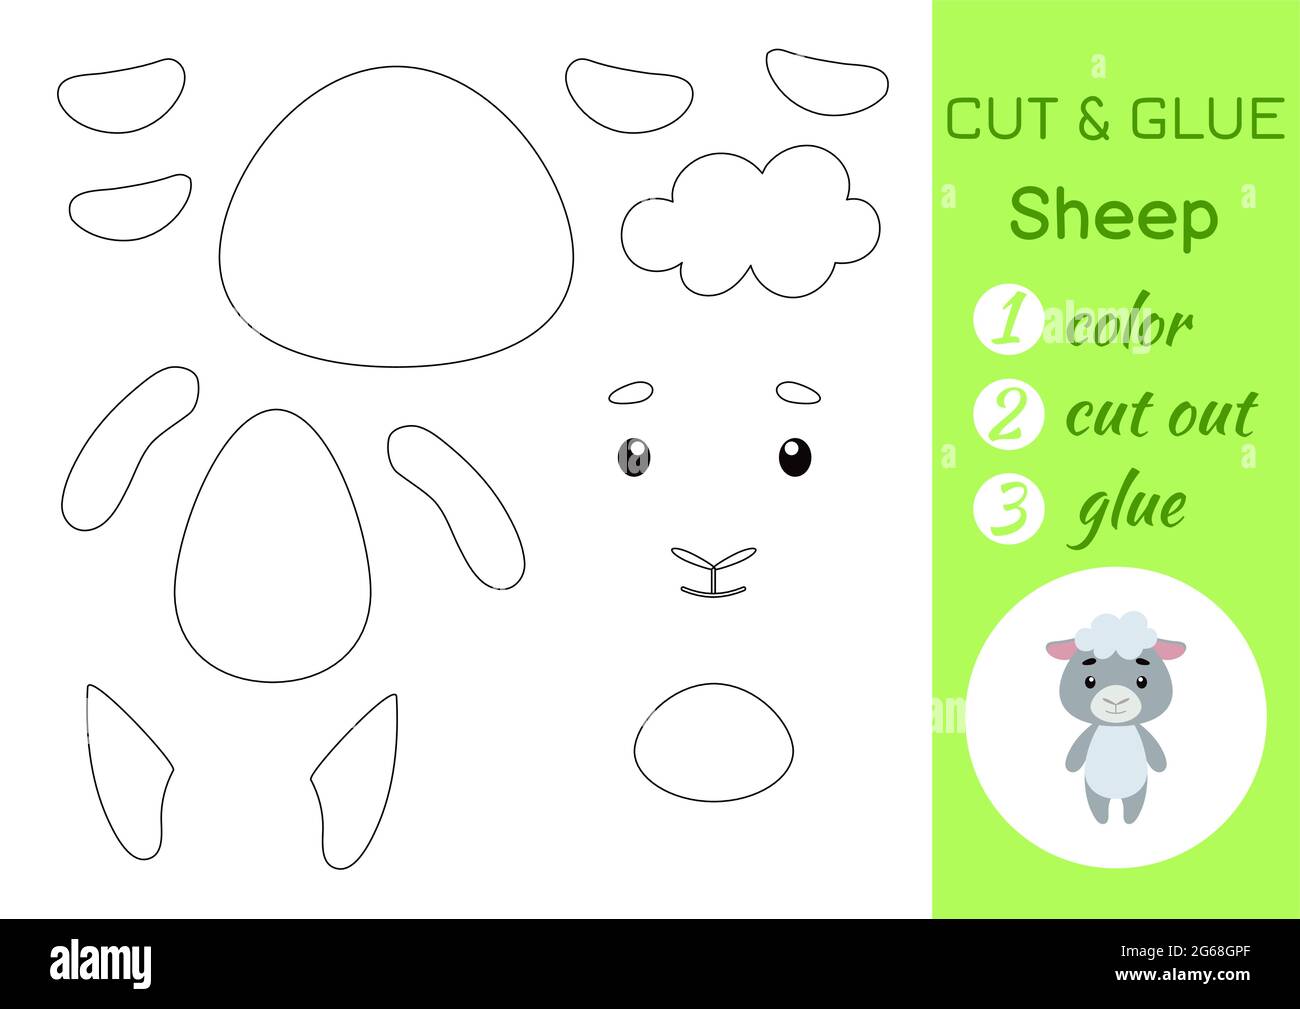 https://c8.alamy.com/comp/2G68GPF/color-cut-and-glue-paper-little-sheep-cut-and-paste-crafts-activity-page-educational-game-for-preschool-children-diy-worksheet-kids-logic-game-p-2G68GPF.jpg